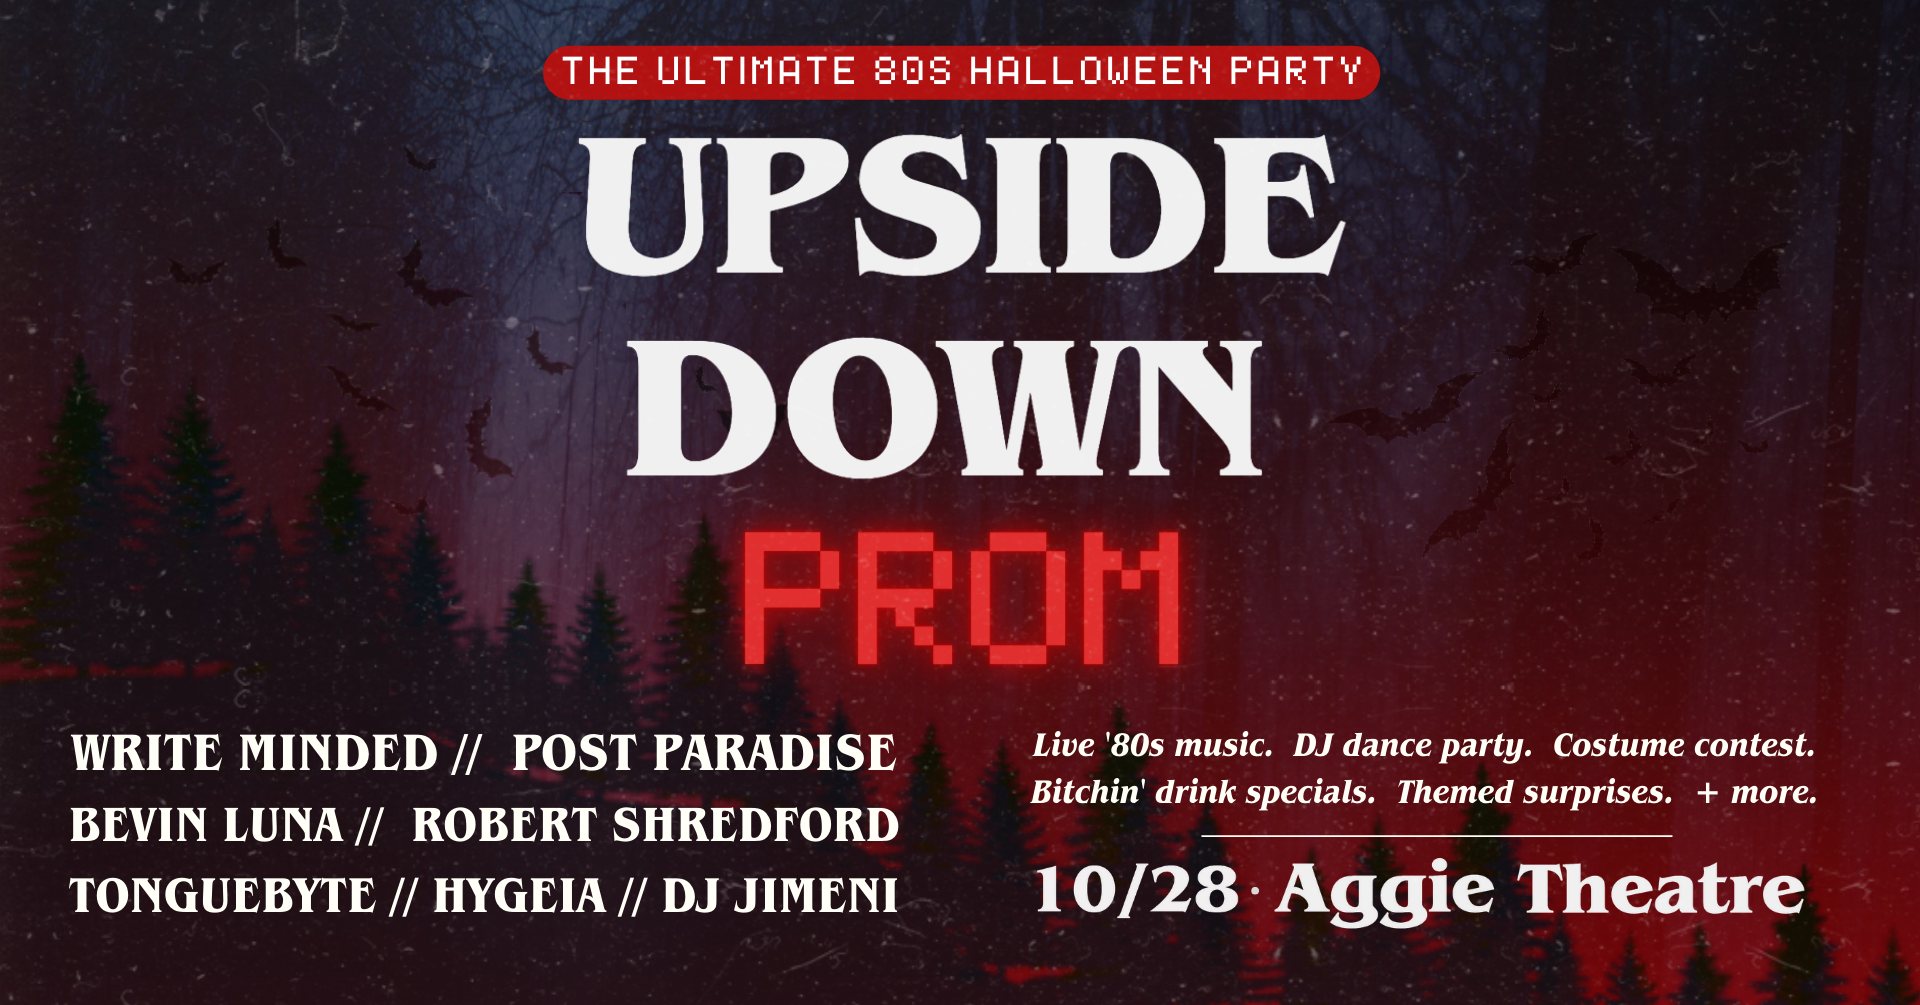 More Info for The Upside Down Prom